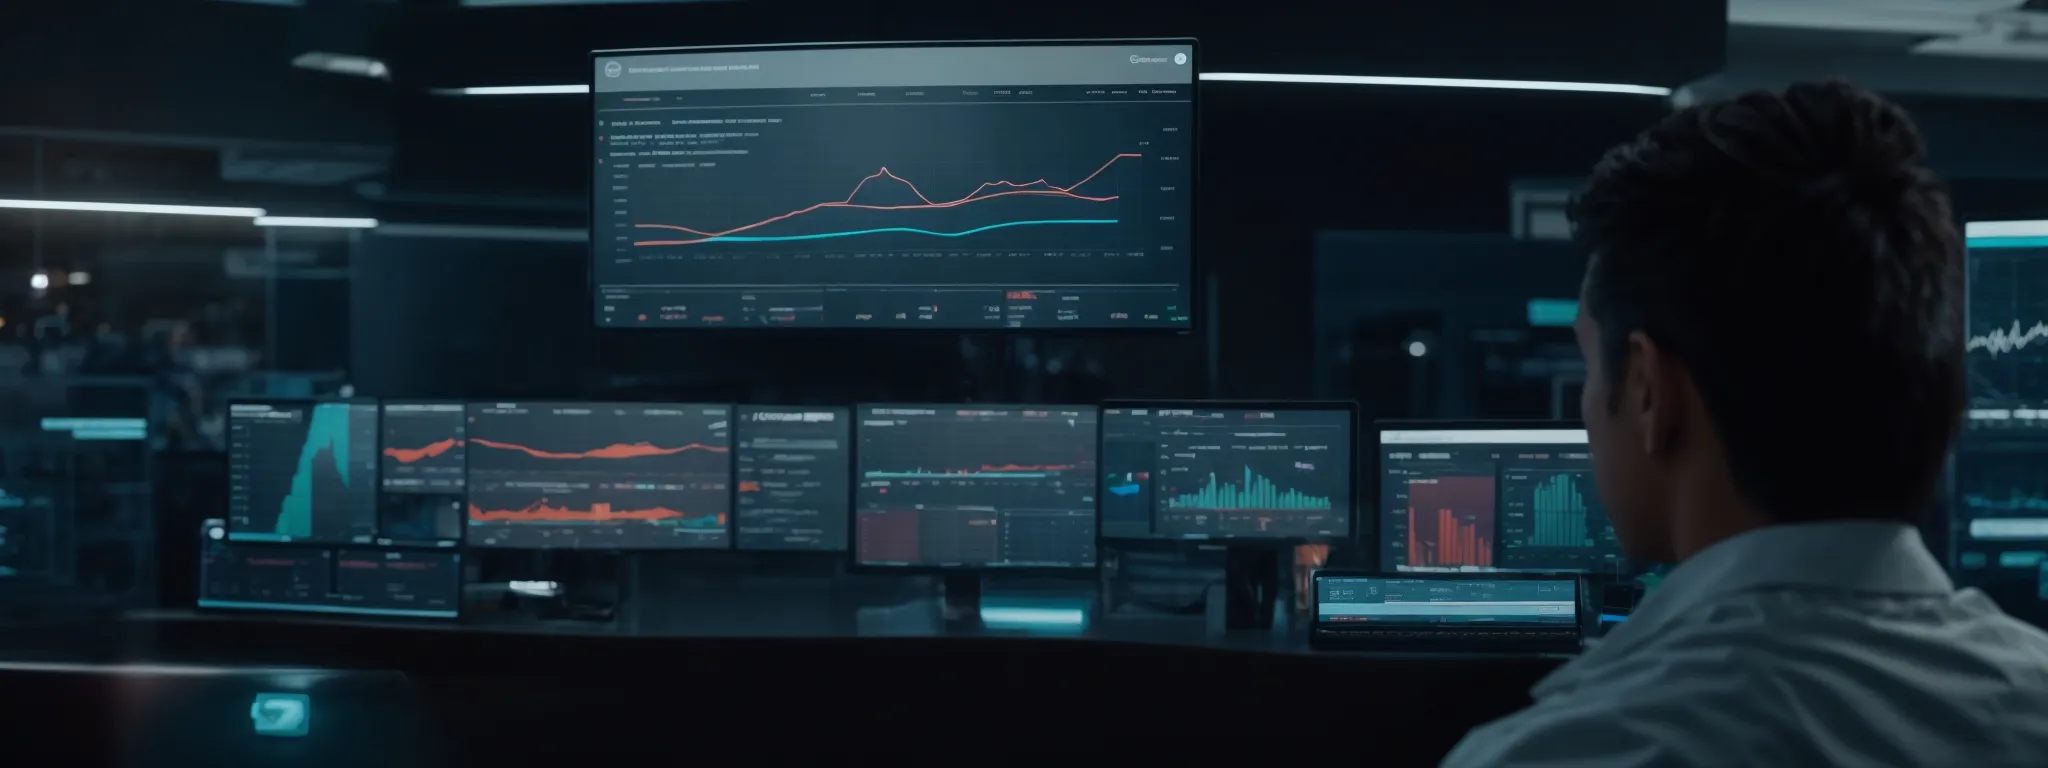 a marketer confidently showcases a futuristic dashboard displaying real-time affiliate analytics on a sleek, high-tech screen.